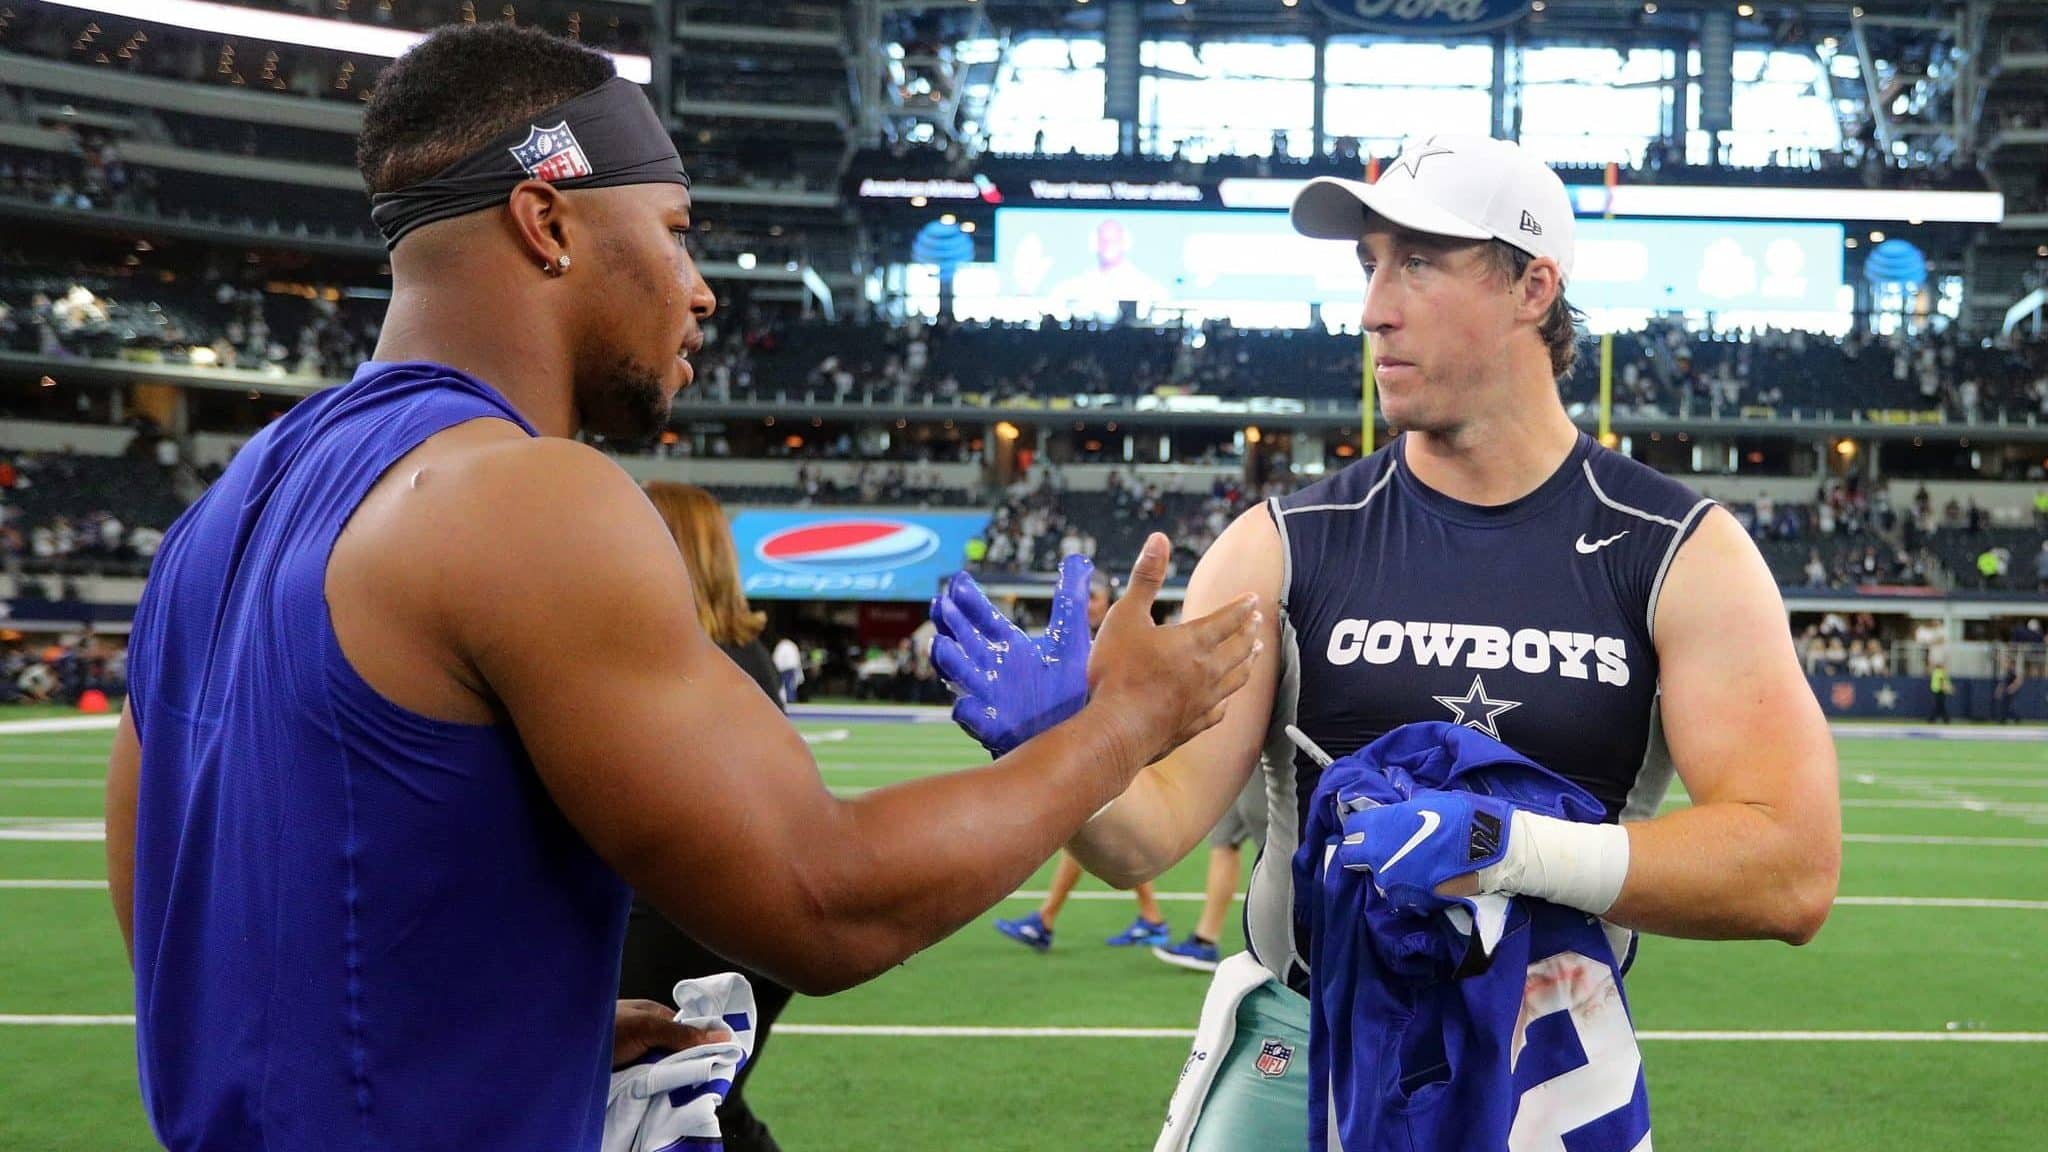 ARLINGTON, TEXAS - SEPTEMBER 08: Saquon Barkley #26 of the New York Giants and Sean Lee #50 of the Dallas Cowboys shakes hands after trading jerseys after the game at AT&T Stadium on September 08, 2019 in Arlington, Texas.